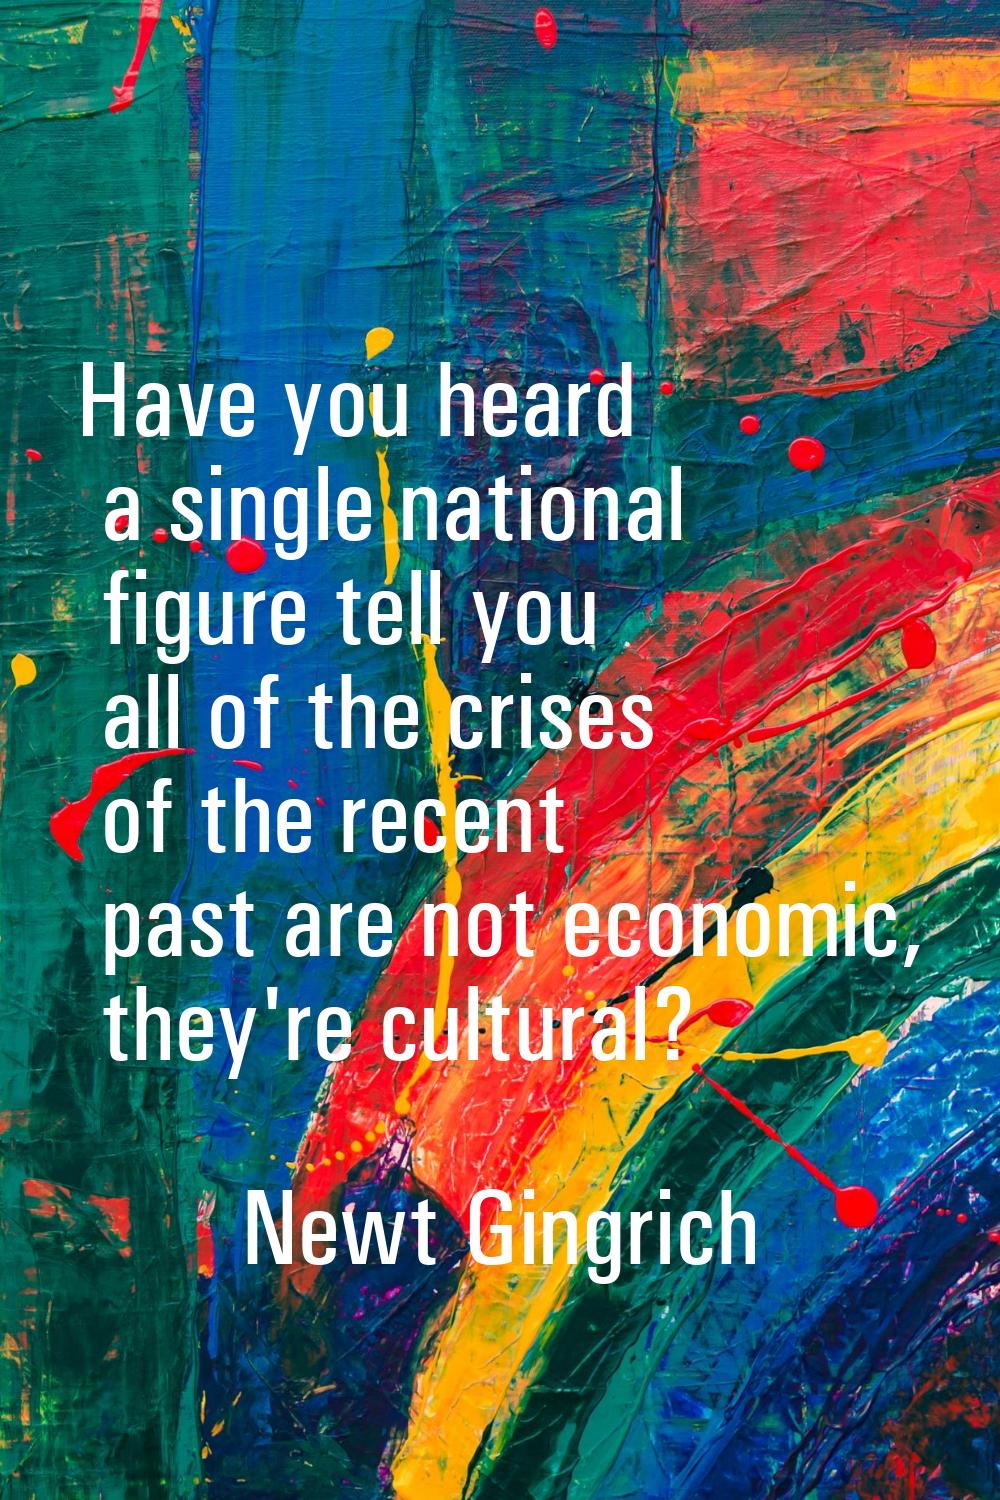 Have you heard a single national figure tell you all of the crises of the recent past are not econo